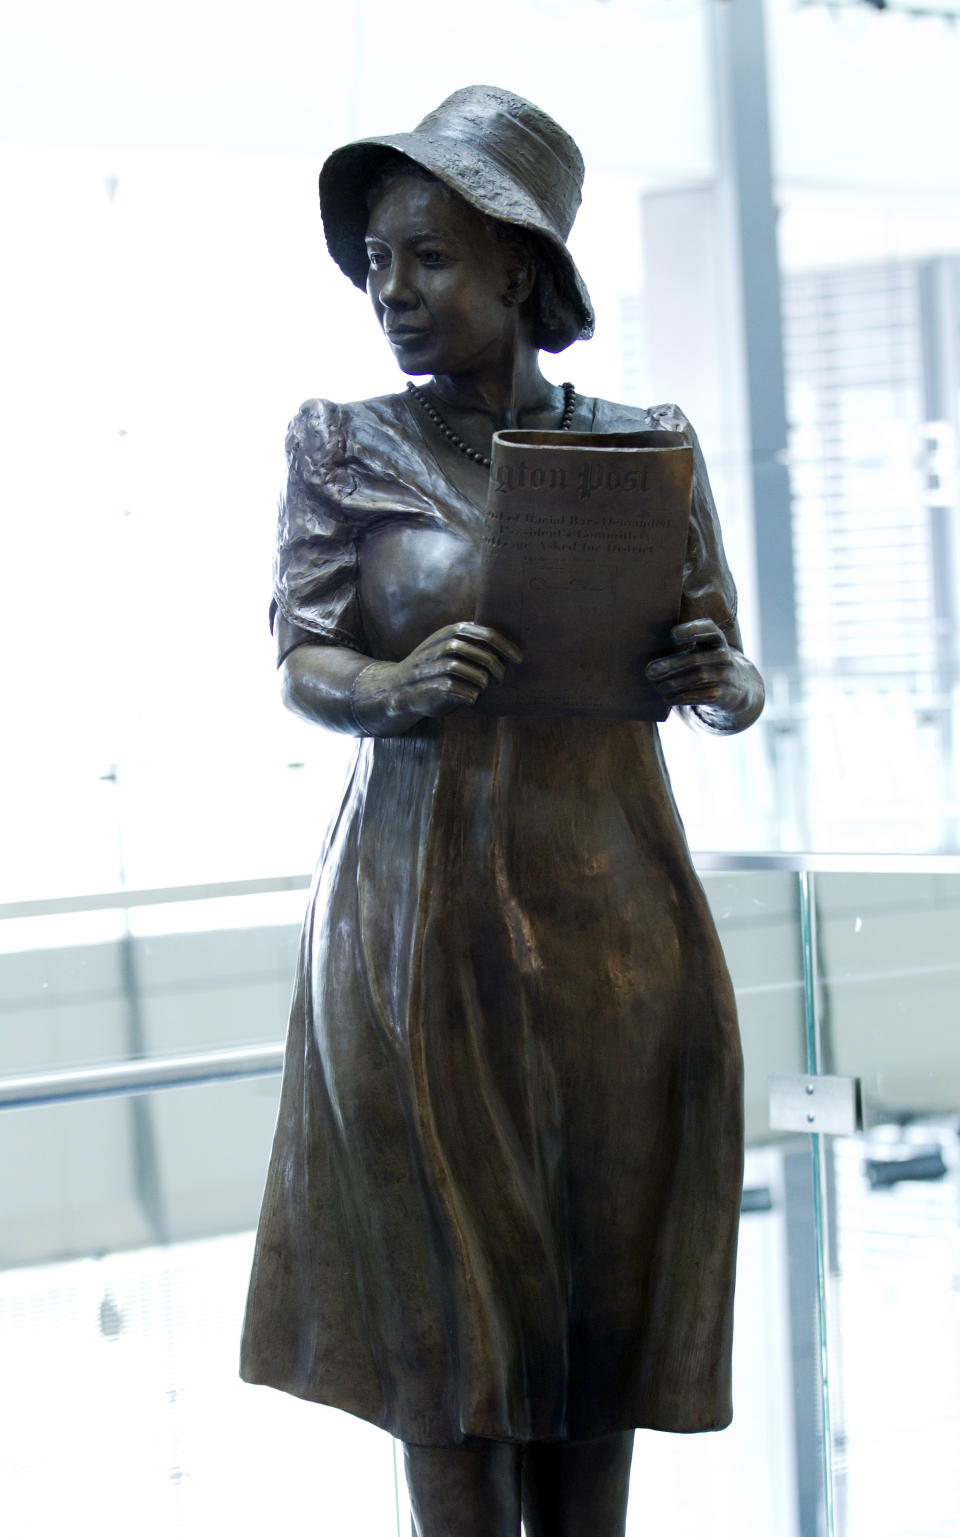 The sculpture of Alice Allison Dunnigan is seen during a ceremony at the Newseum, Friday, Sept. 21, 2018, in Washington. Dunnigan triumphed over sexism and racism to become the first black woman accredited to cover the White House. (AP Photo/Jose Luis Magana)